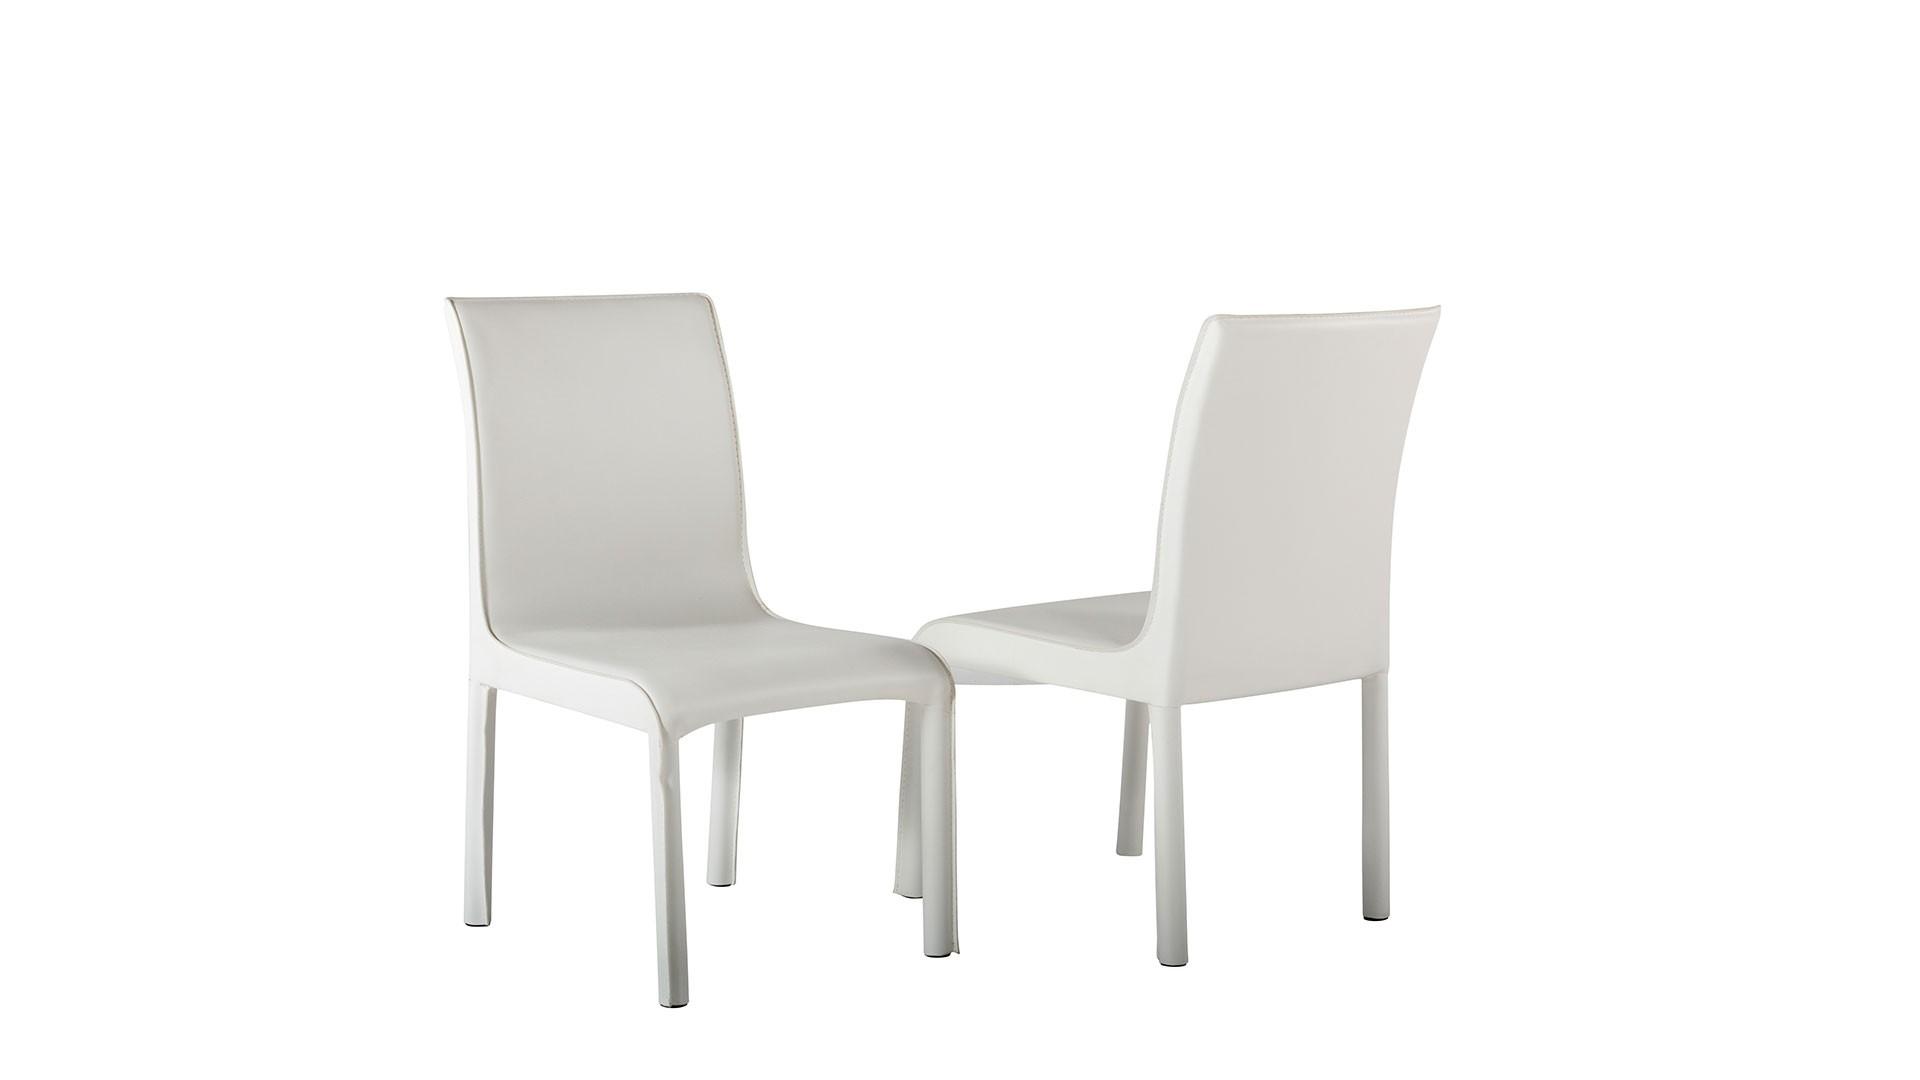 At Home USA Swansea Dining Side Chair